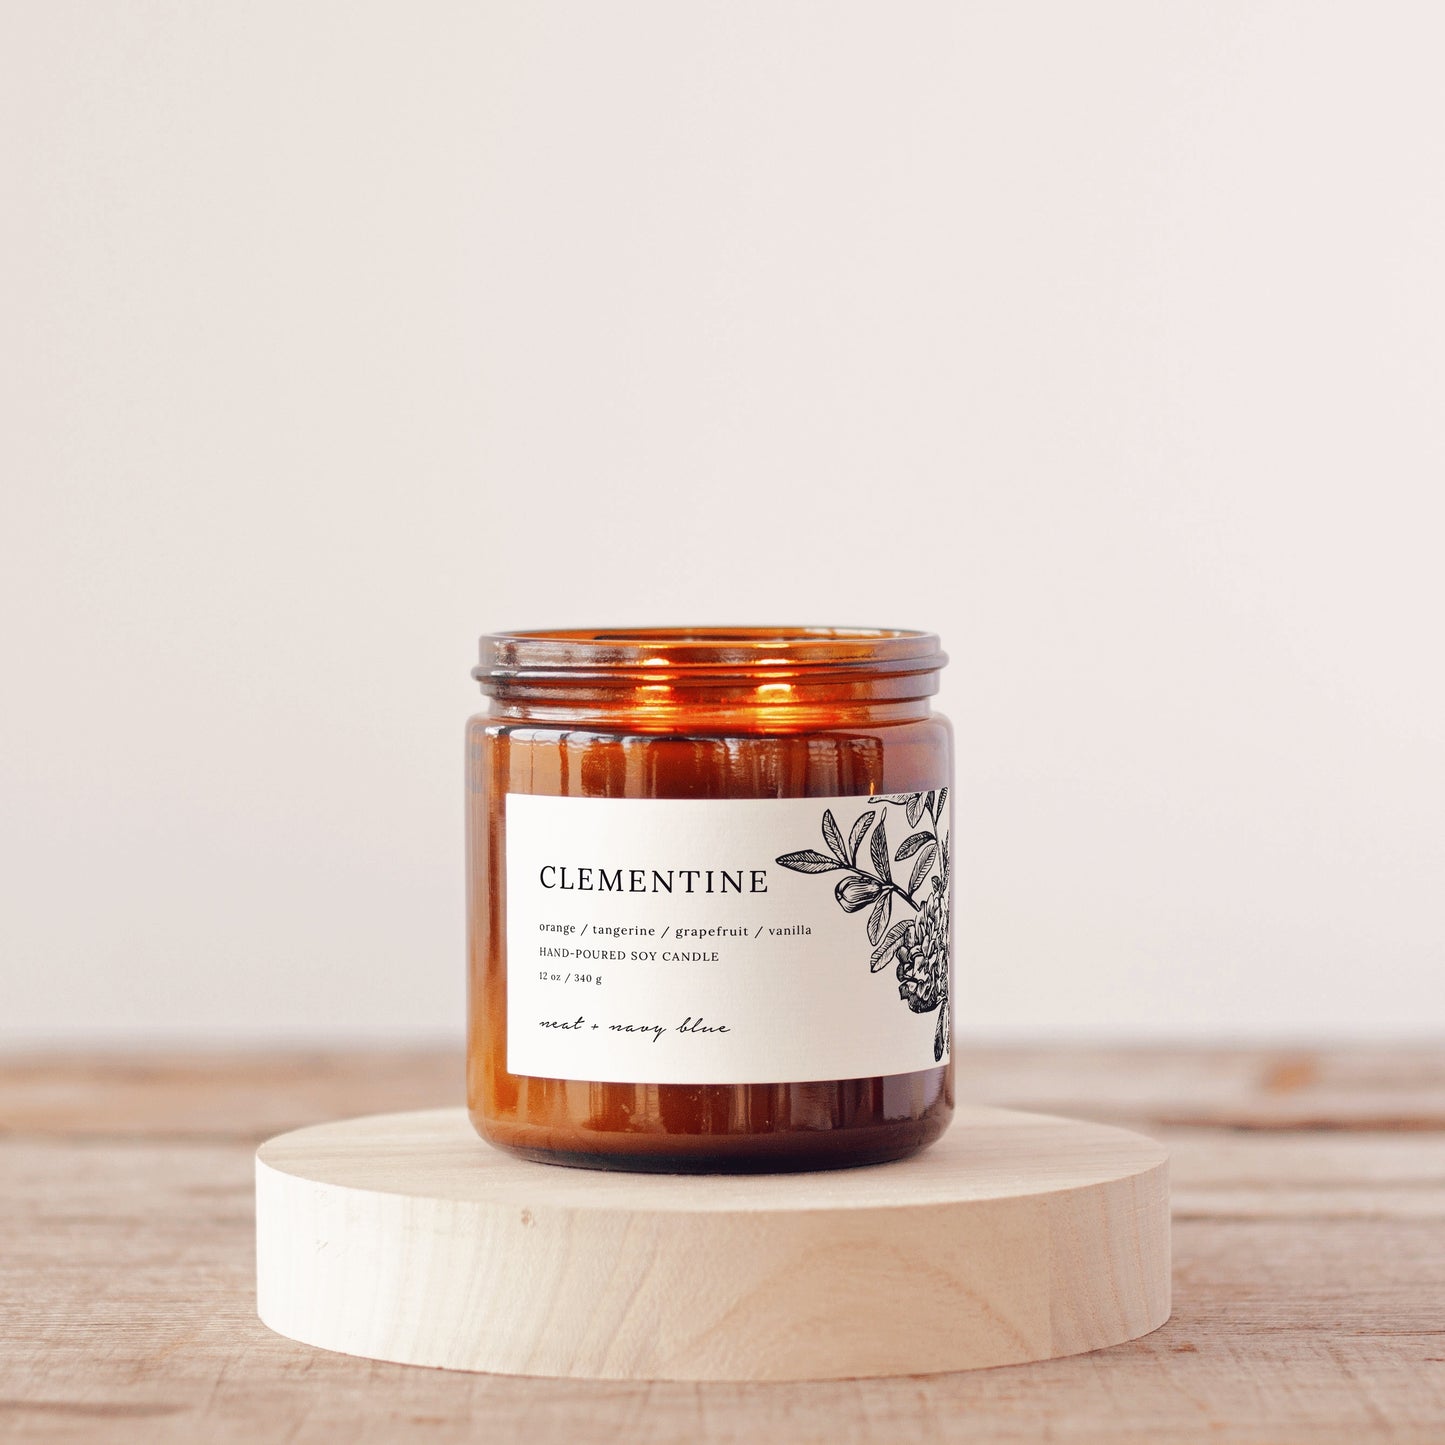 Clementine 12 oz soy candle